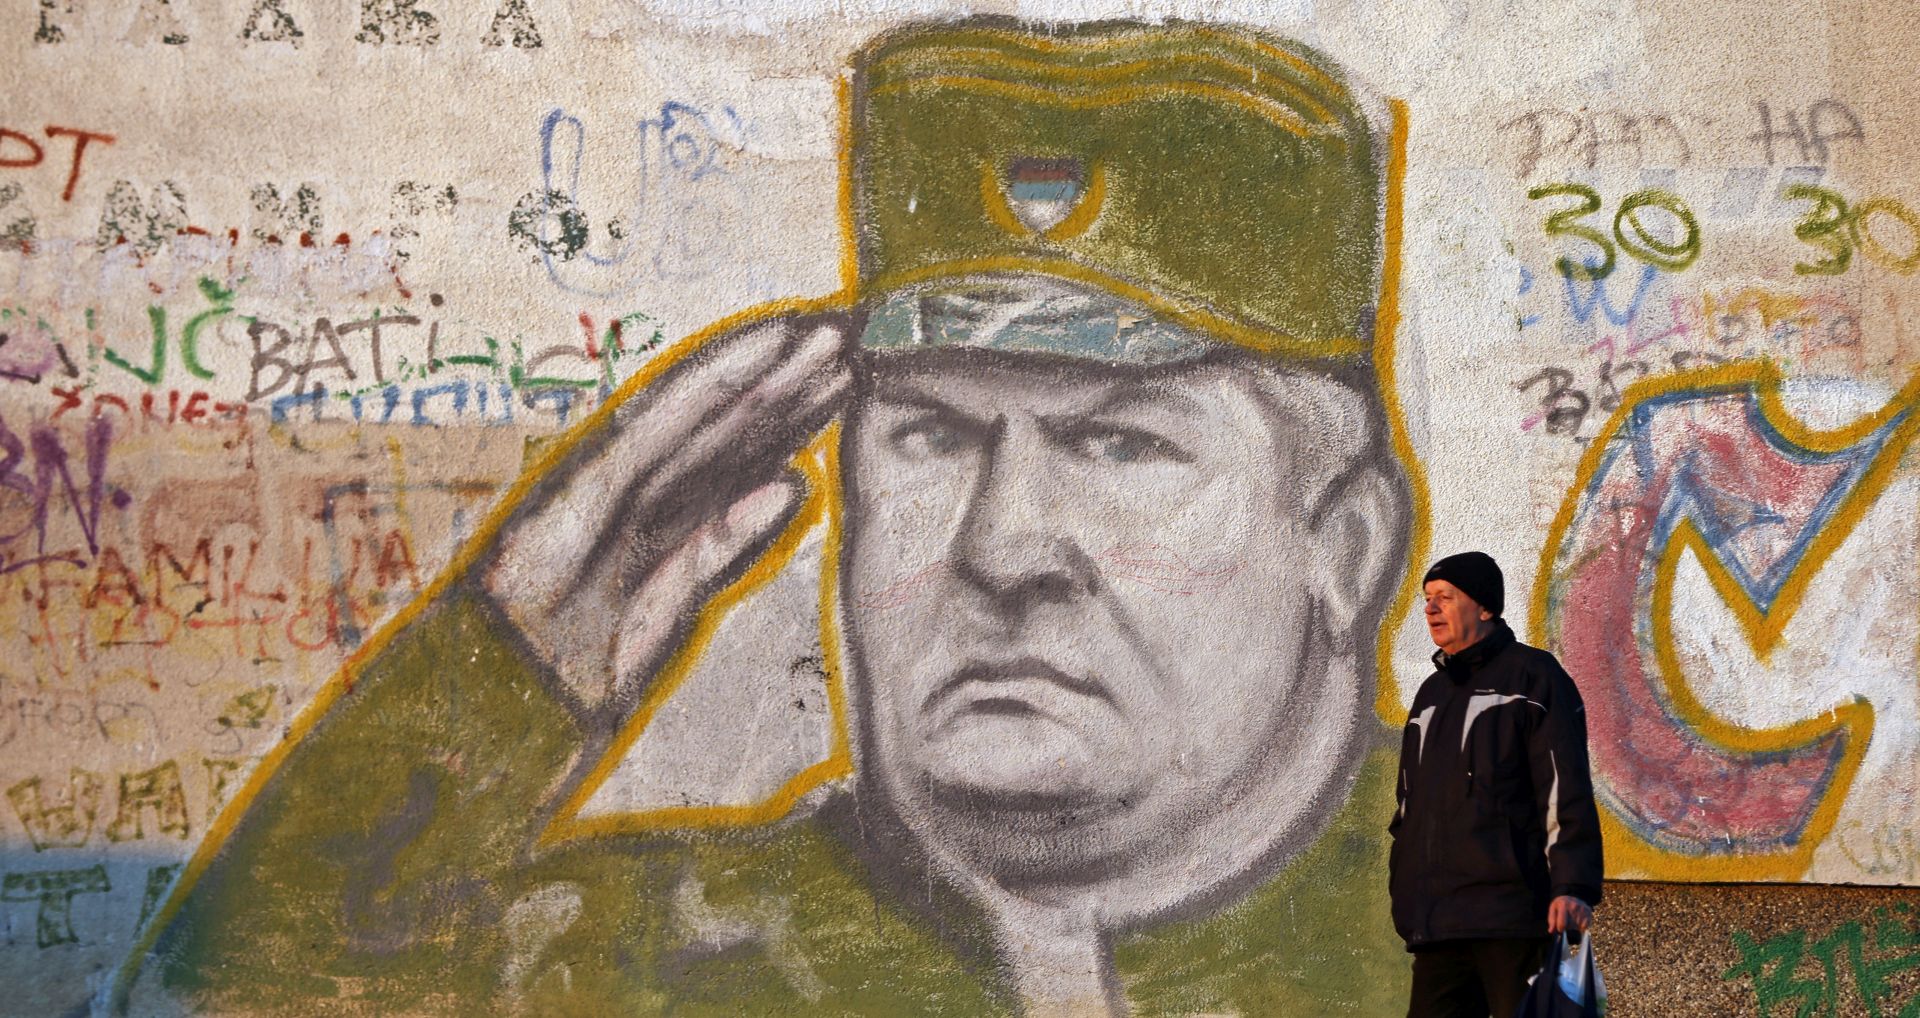 epa06342087 (FILE) - A man walks in front of a mural depicting Serbian General Ratko Mladic, a war-time Bosnian Serb military commander, in a suburb of Belgrade, Serbia, 12 December 2016 (reissued 21 November 2017). The United Nations International Criminal Tribunal for the former Yugoslavia (ICTY) will on 22 November 2017 announce the verdict on Mladic in The Hague, the Netherlands. Mladic, who was Commander of the Bosnian Serb Army (VRS) Main Staff from May 1992 until at least November 1996, is indicted with counts of genocide, crimes against humanity, and violations of the laws or customs of war.  EPA/KOCA SULEJMANOVIC *** Local Caption *** 53155793